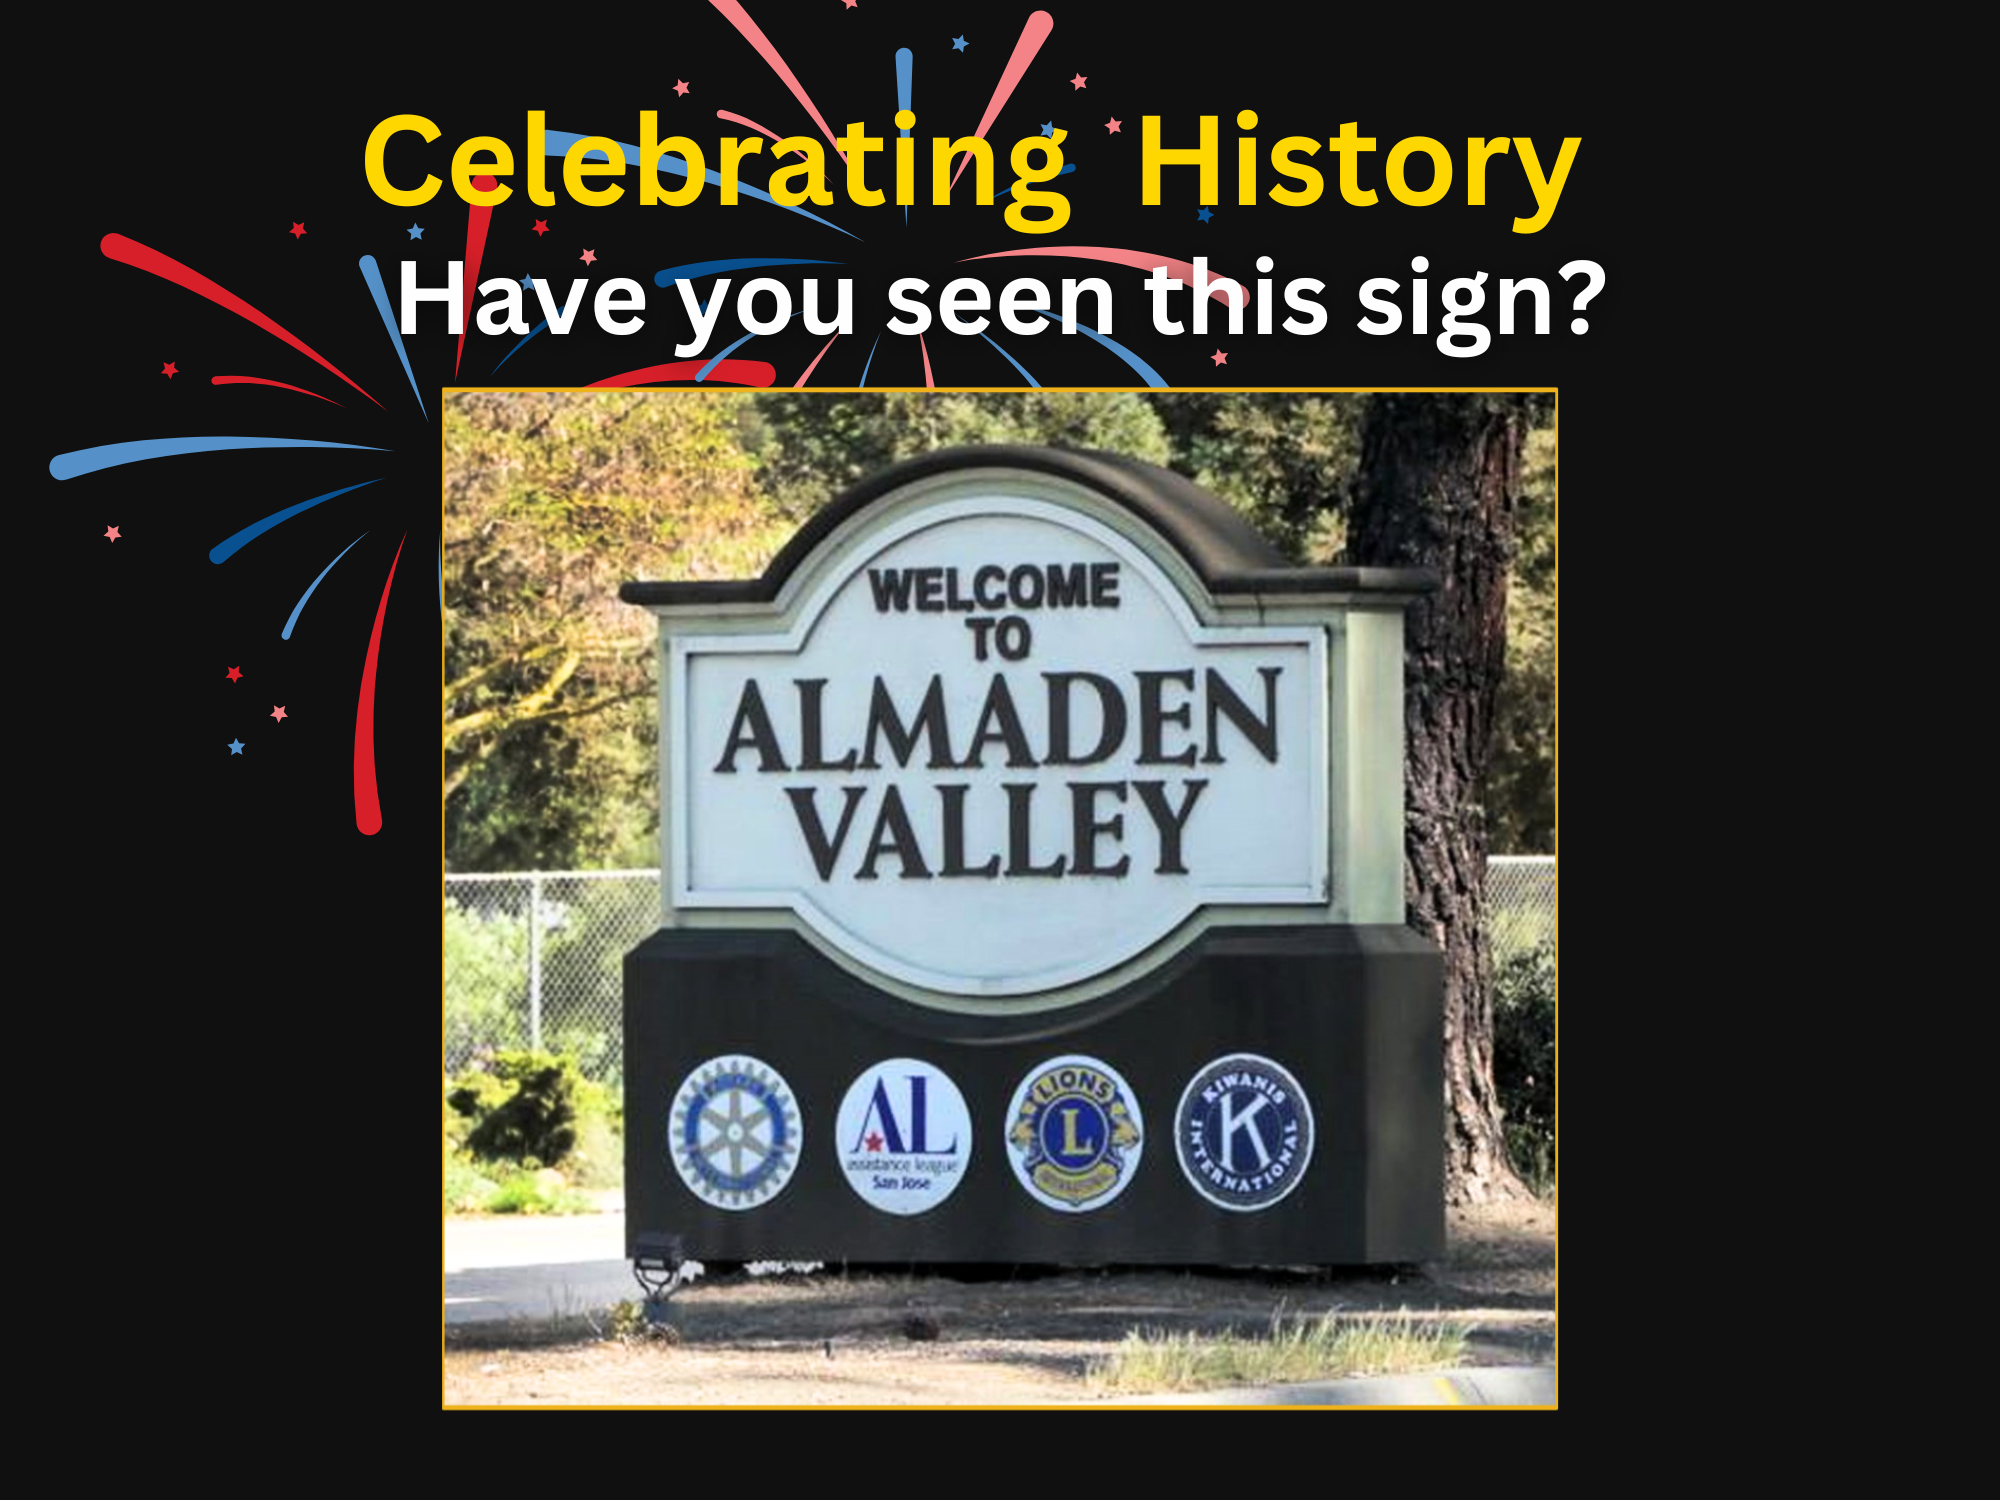 Celebrating History - Have you seen this sign?